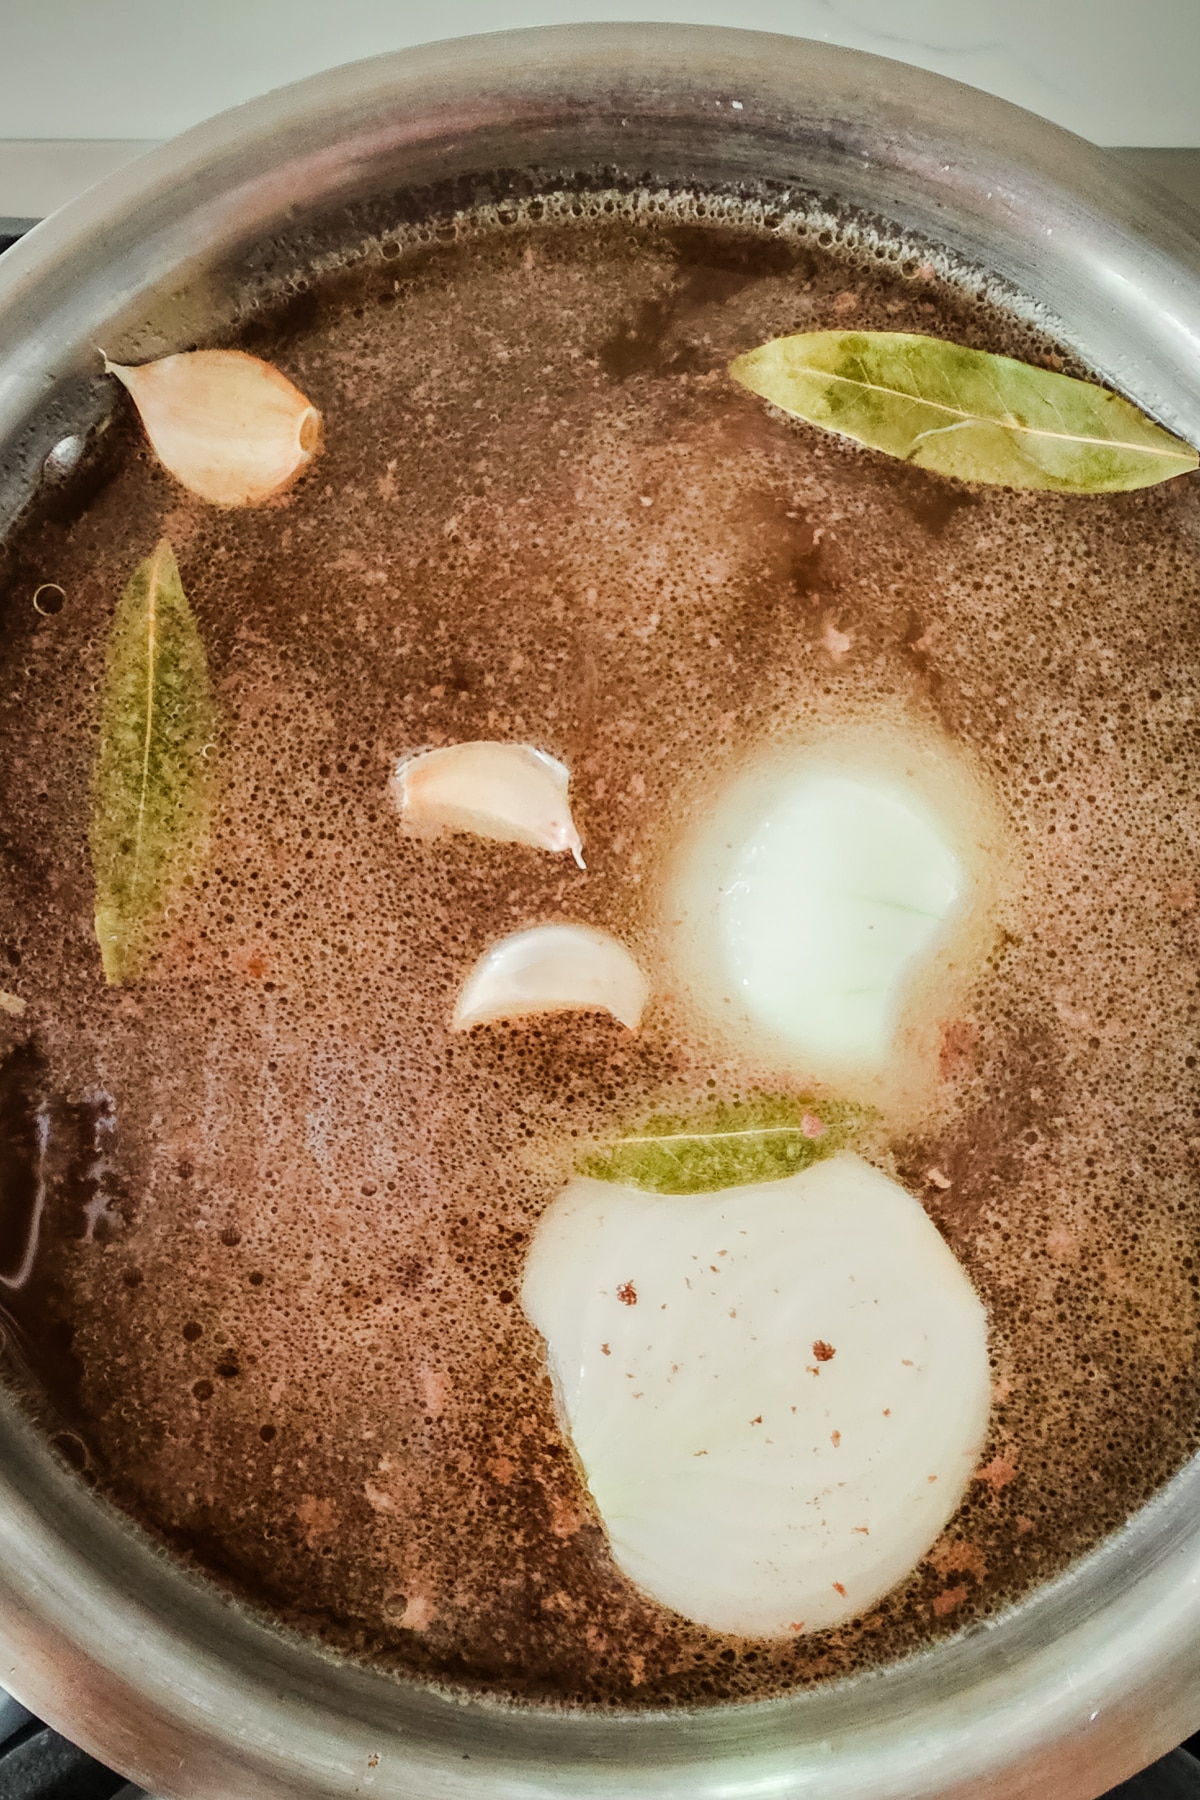 beef broth is cooked in a large pot with onions and bay leaves.